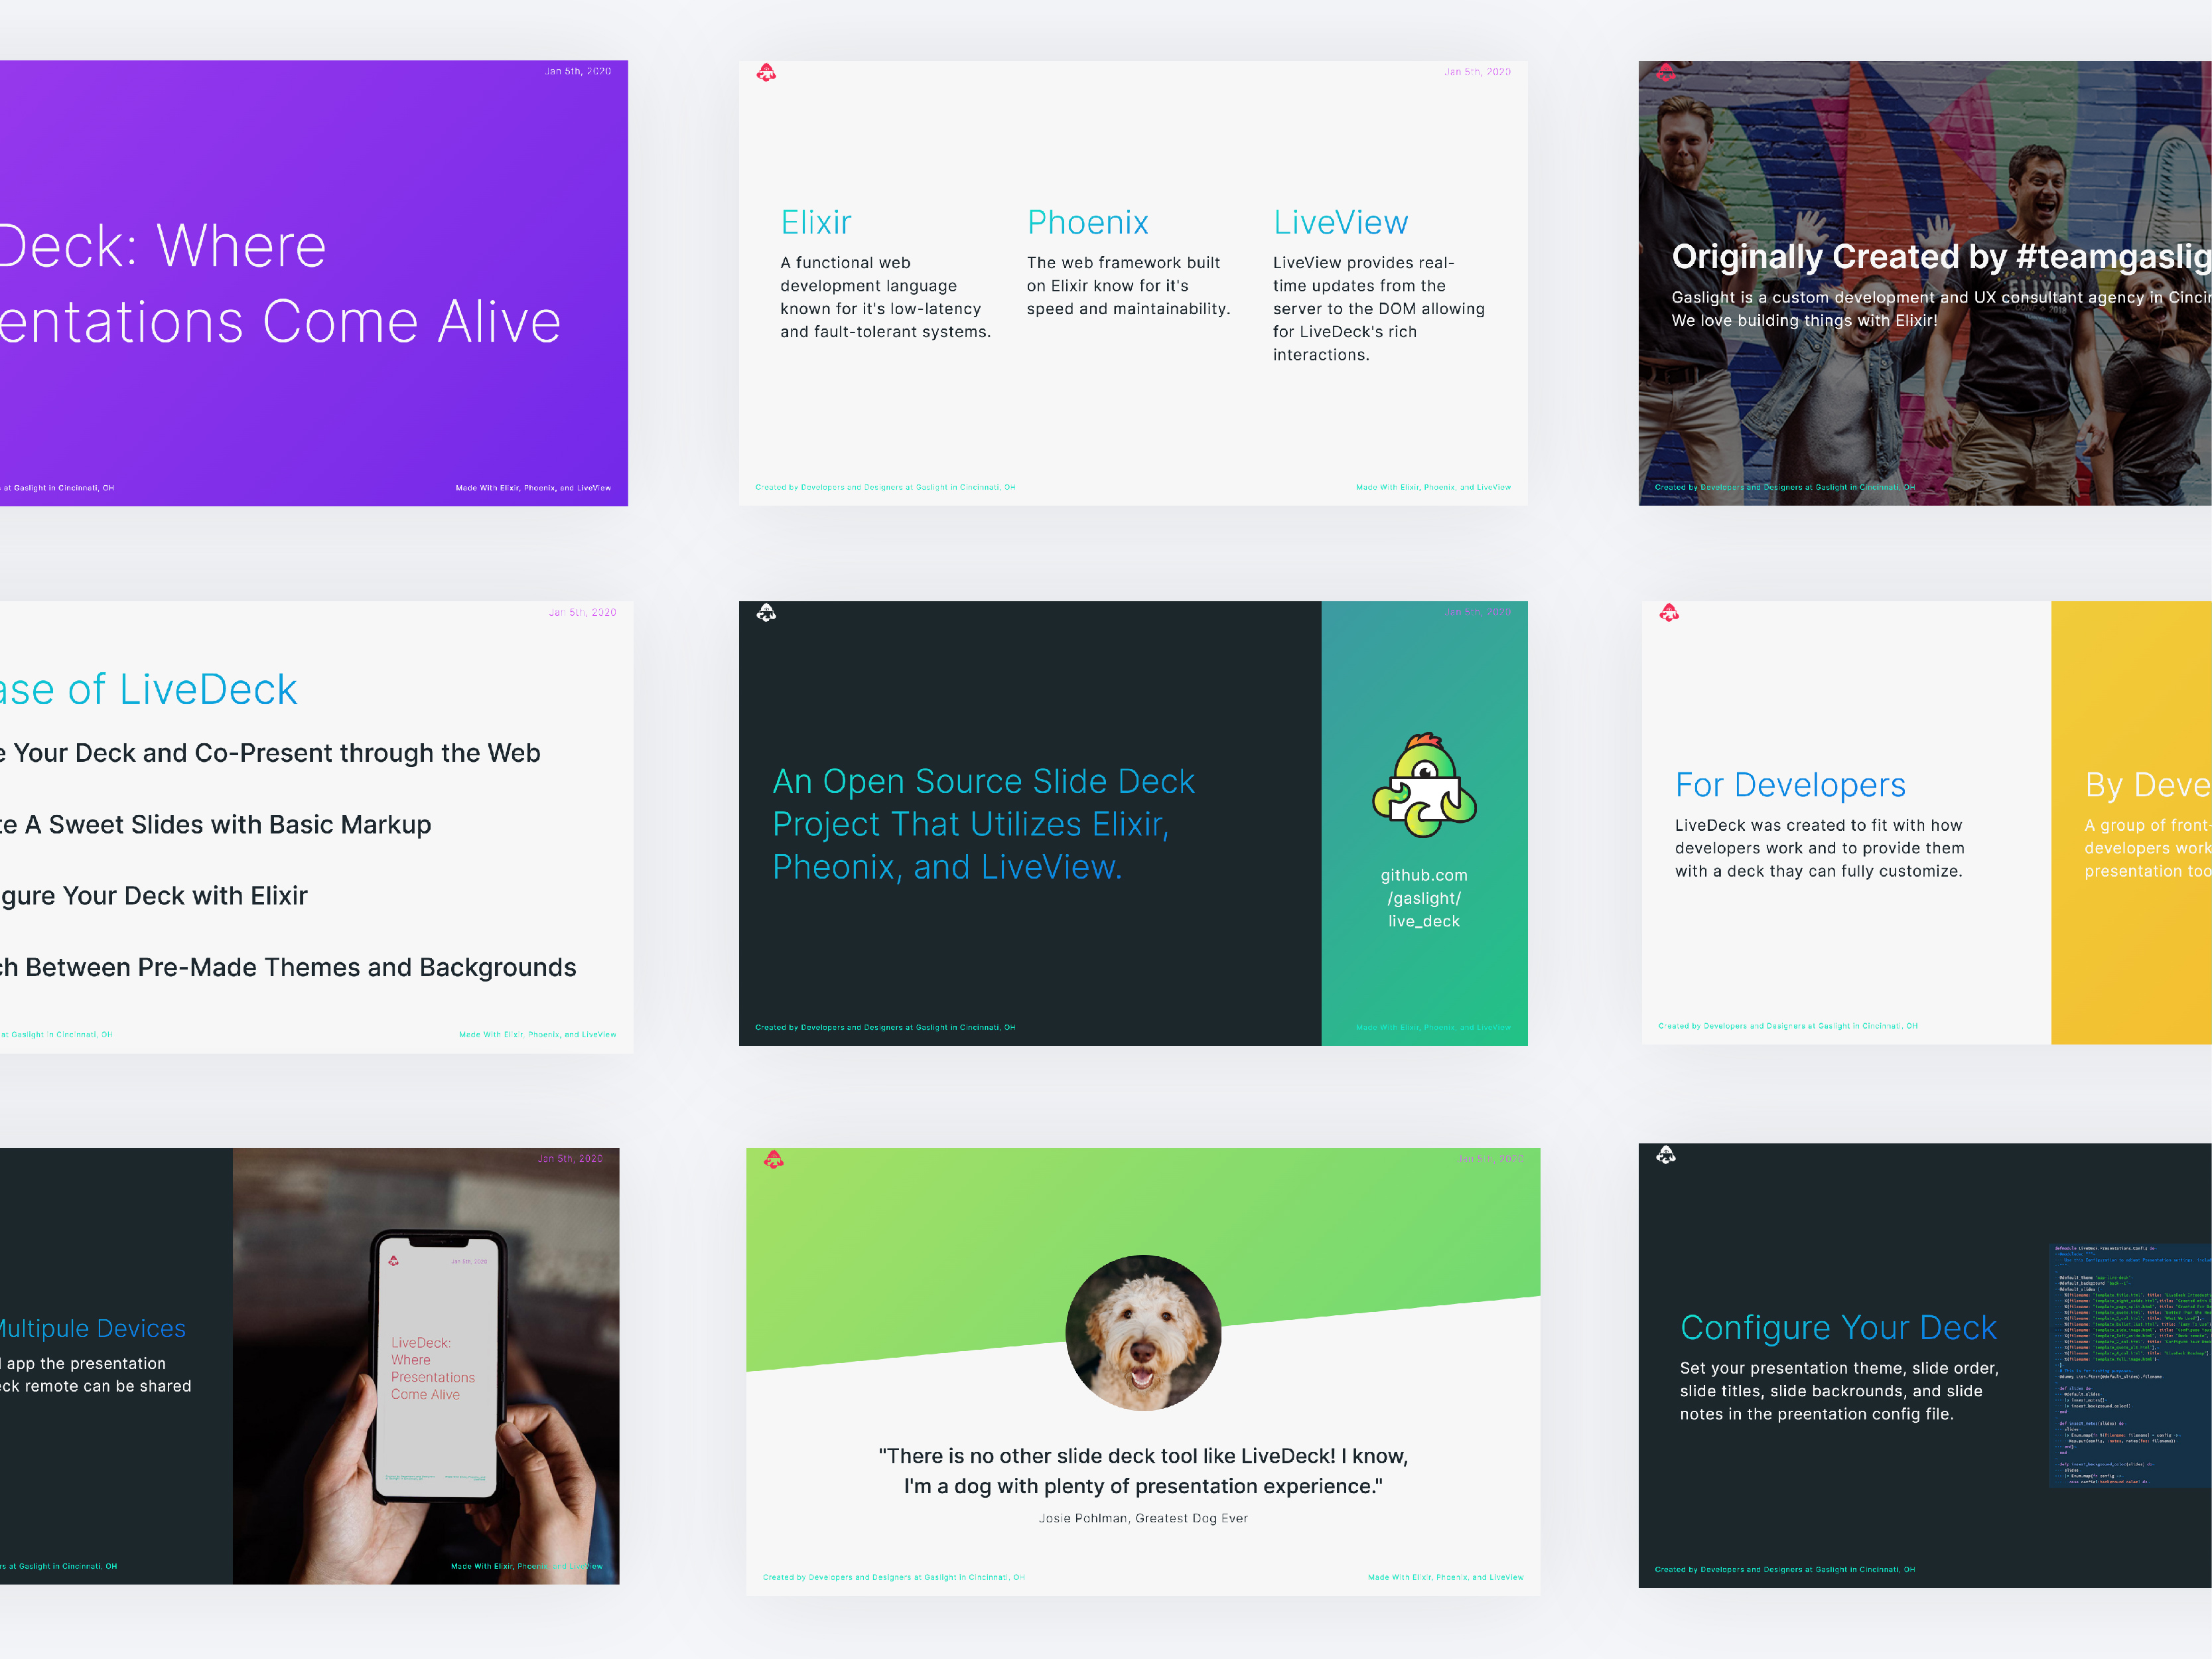 Launching Live Deck Beta: Where Presentations Come Alive